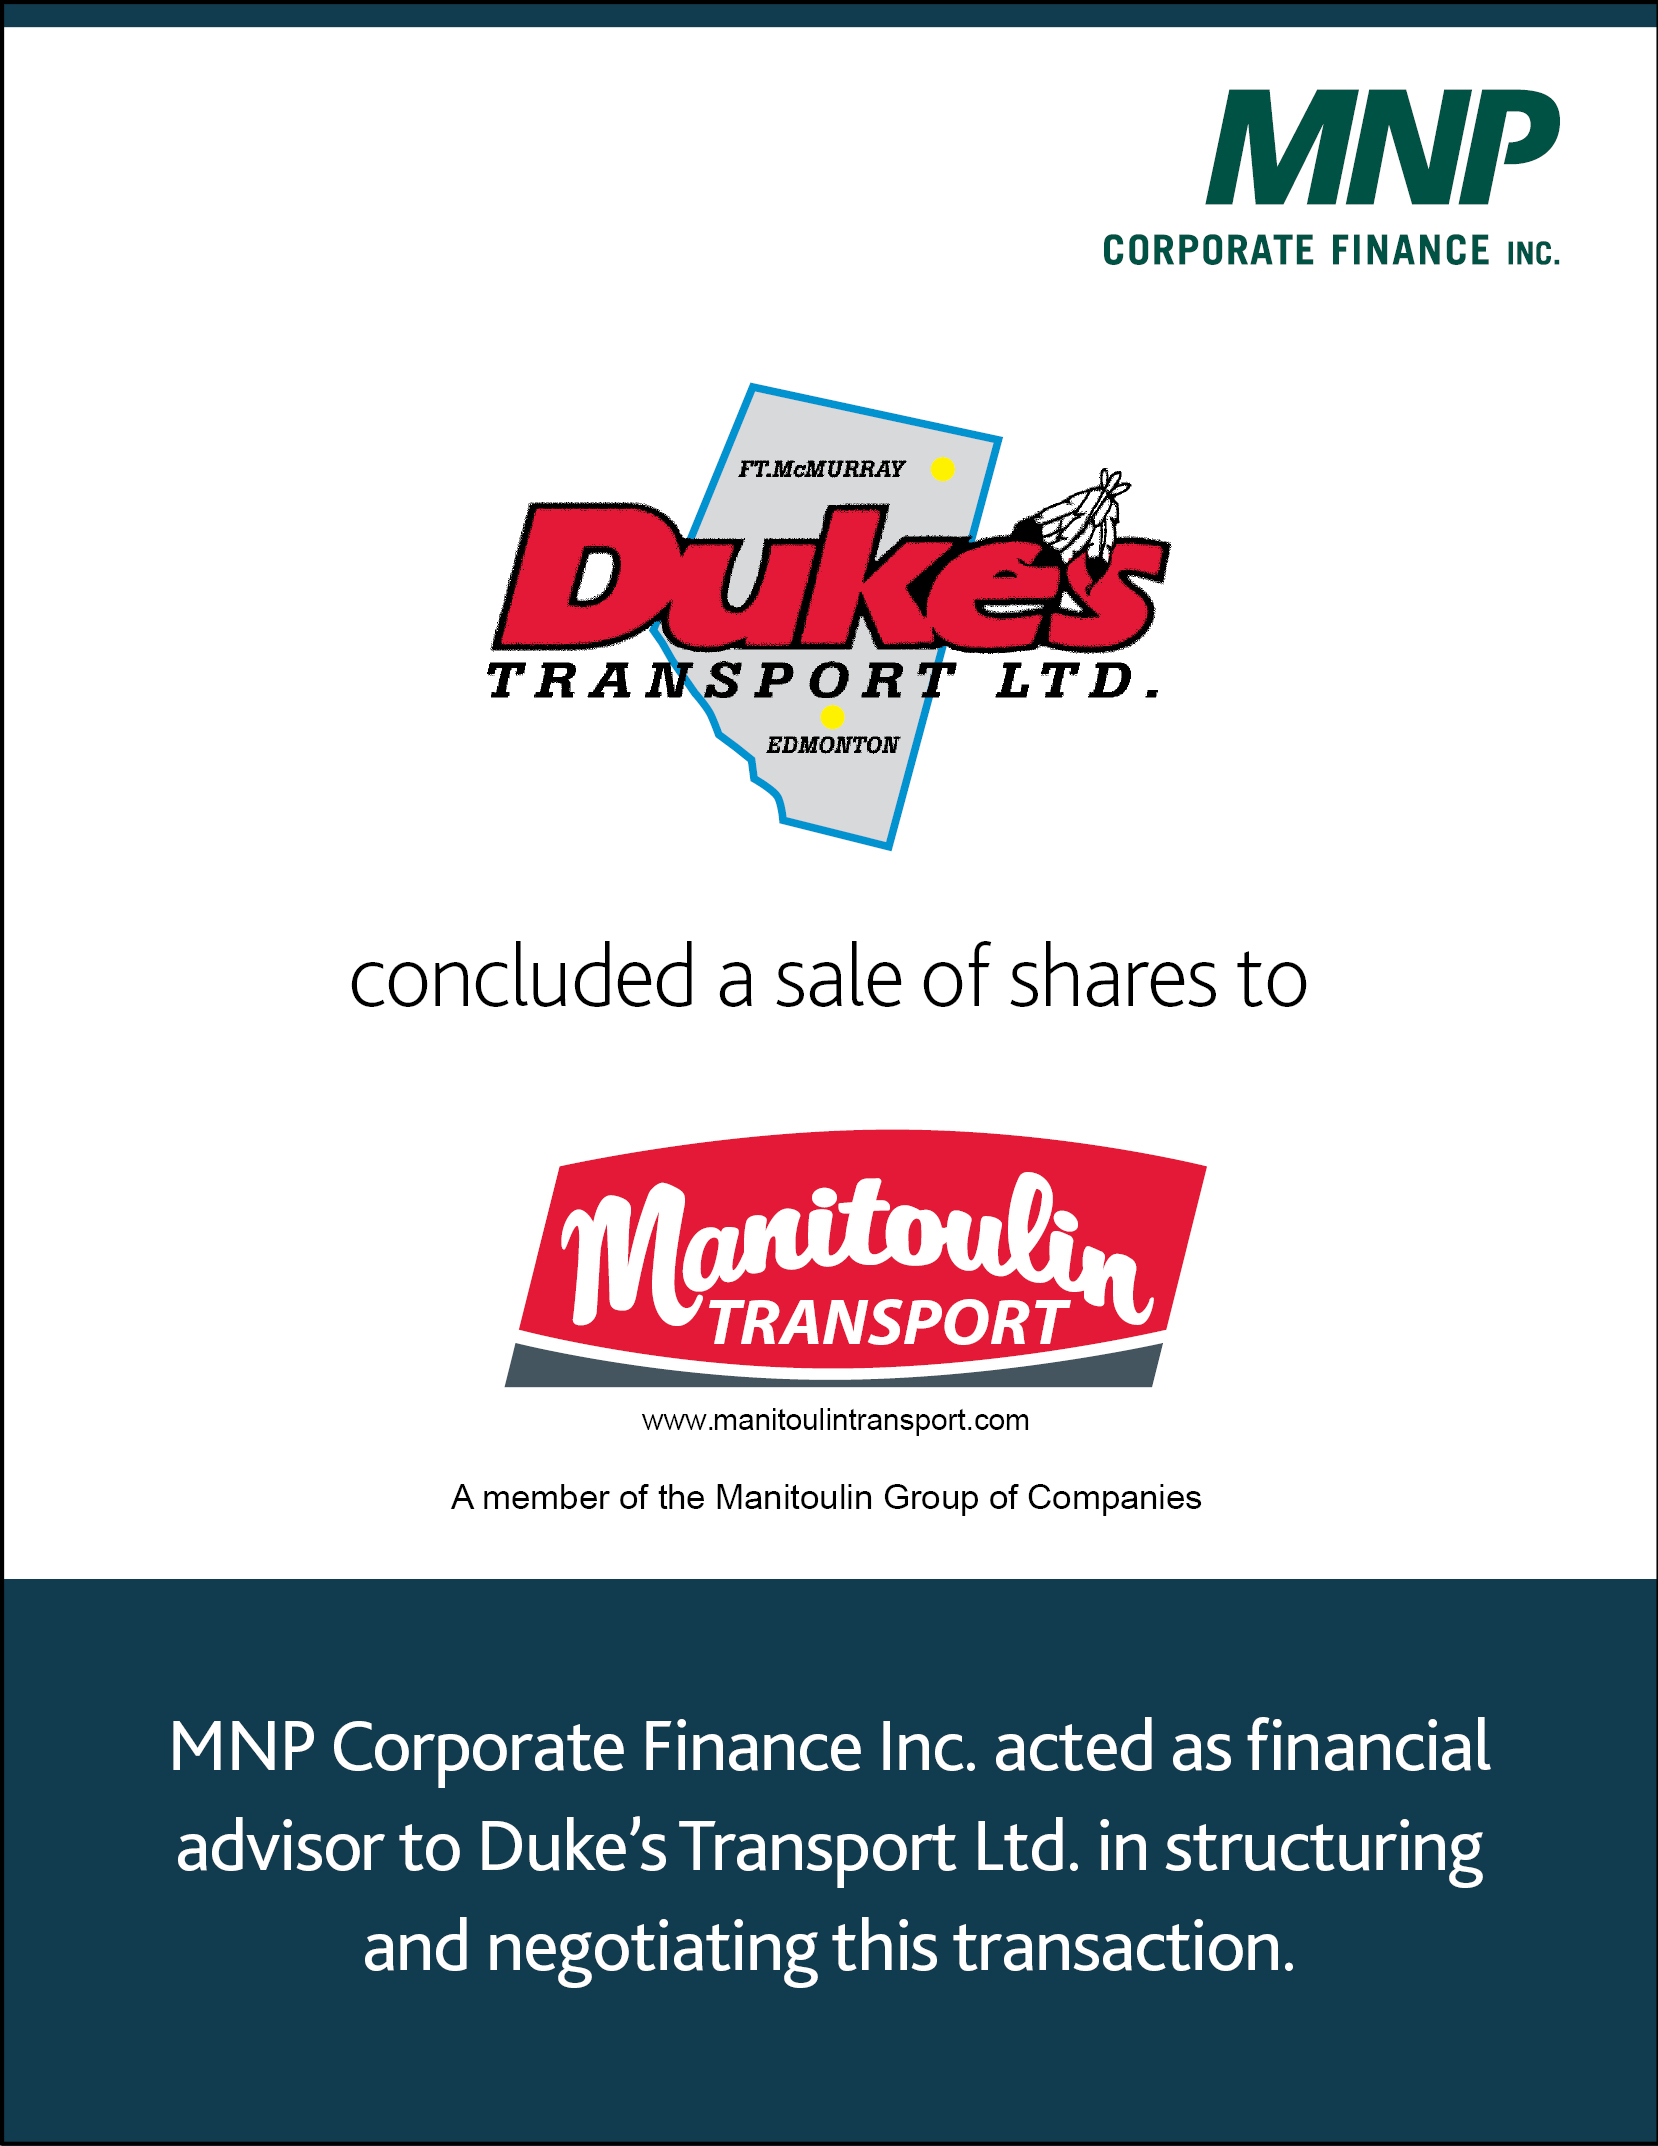 Dukes Transport Ltd concluded a sale of shares to Manitoulin Transport